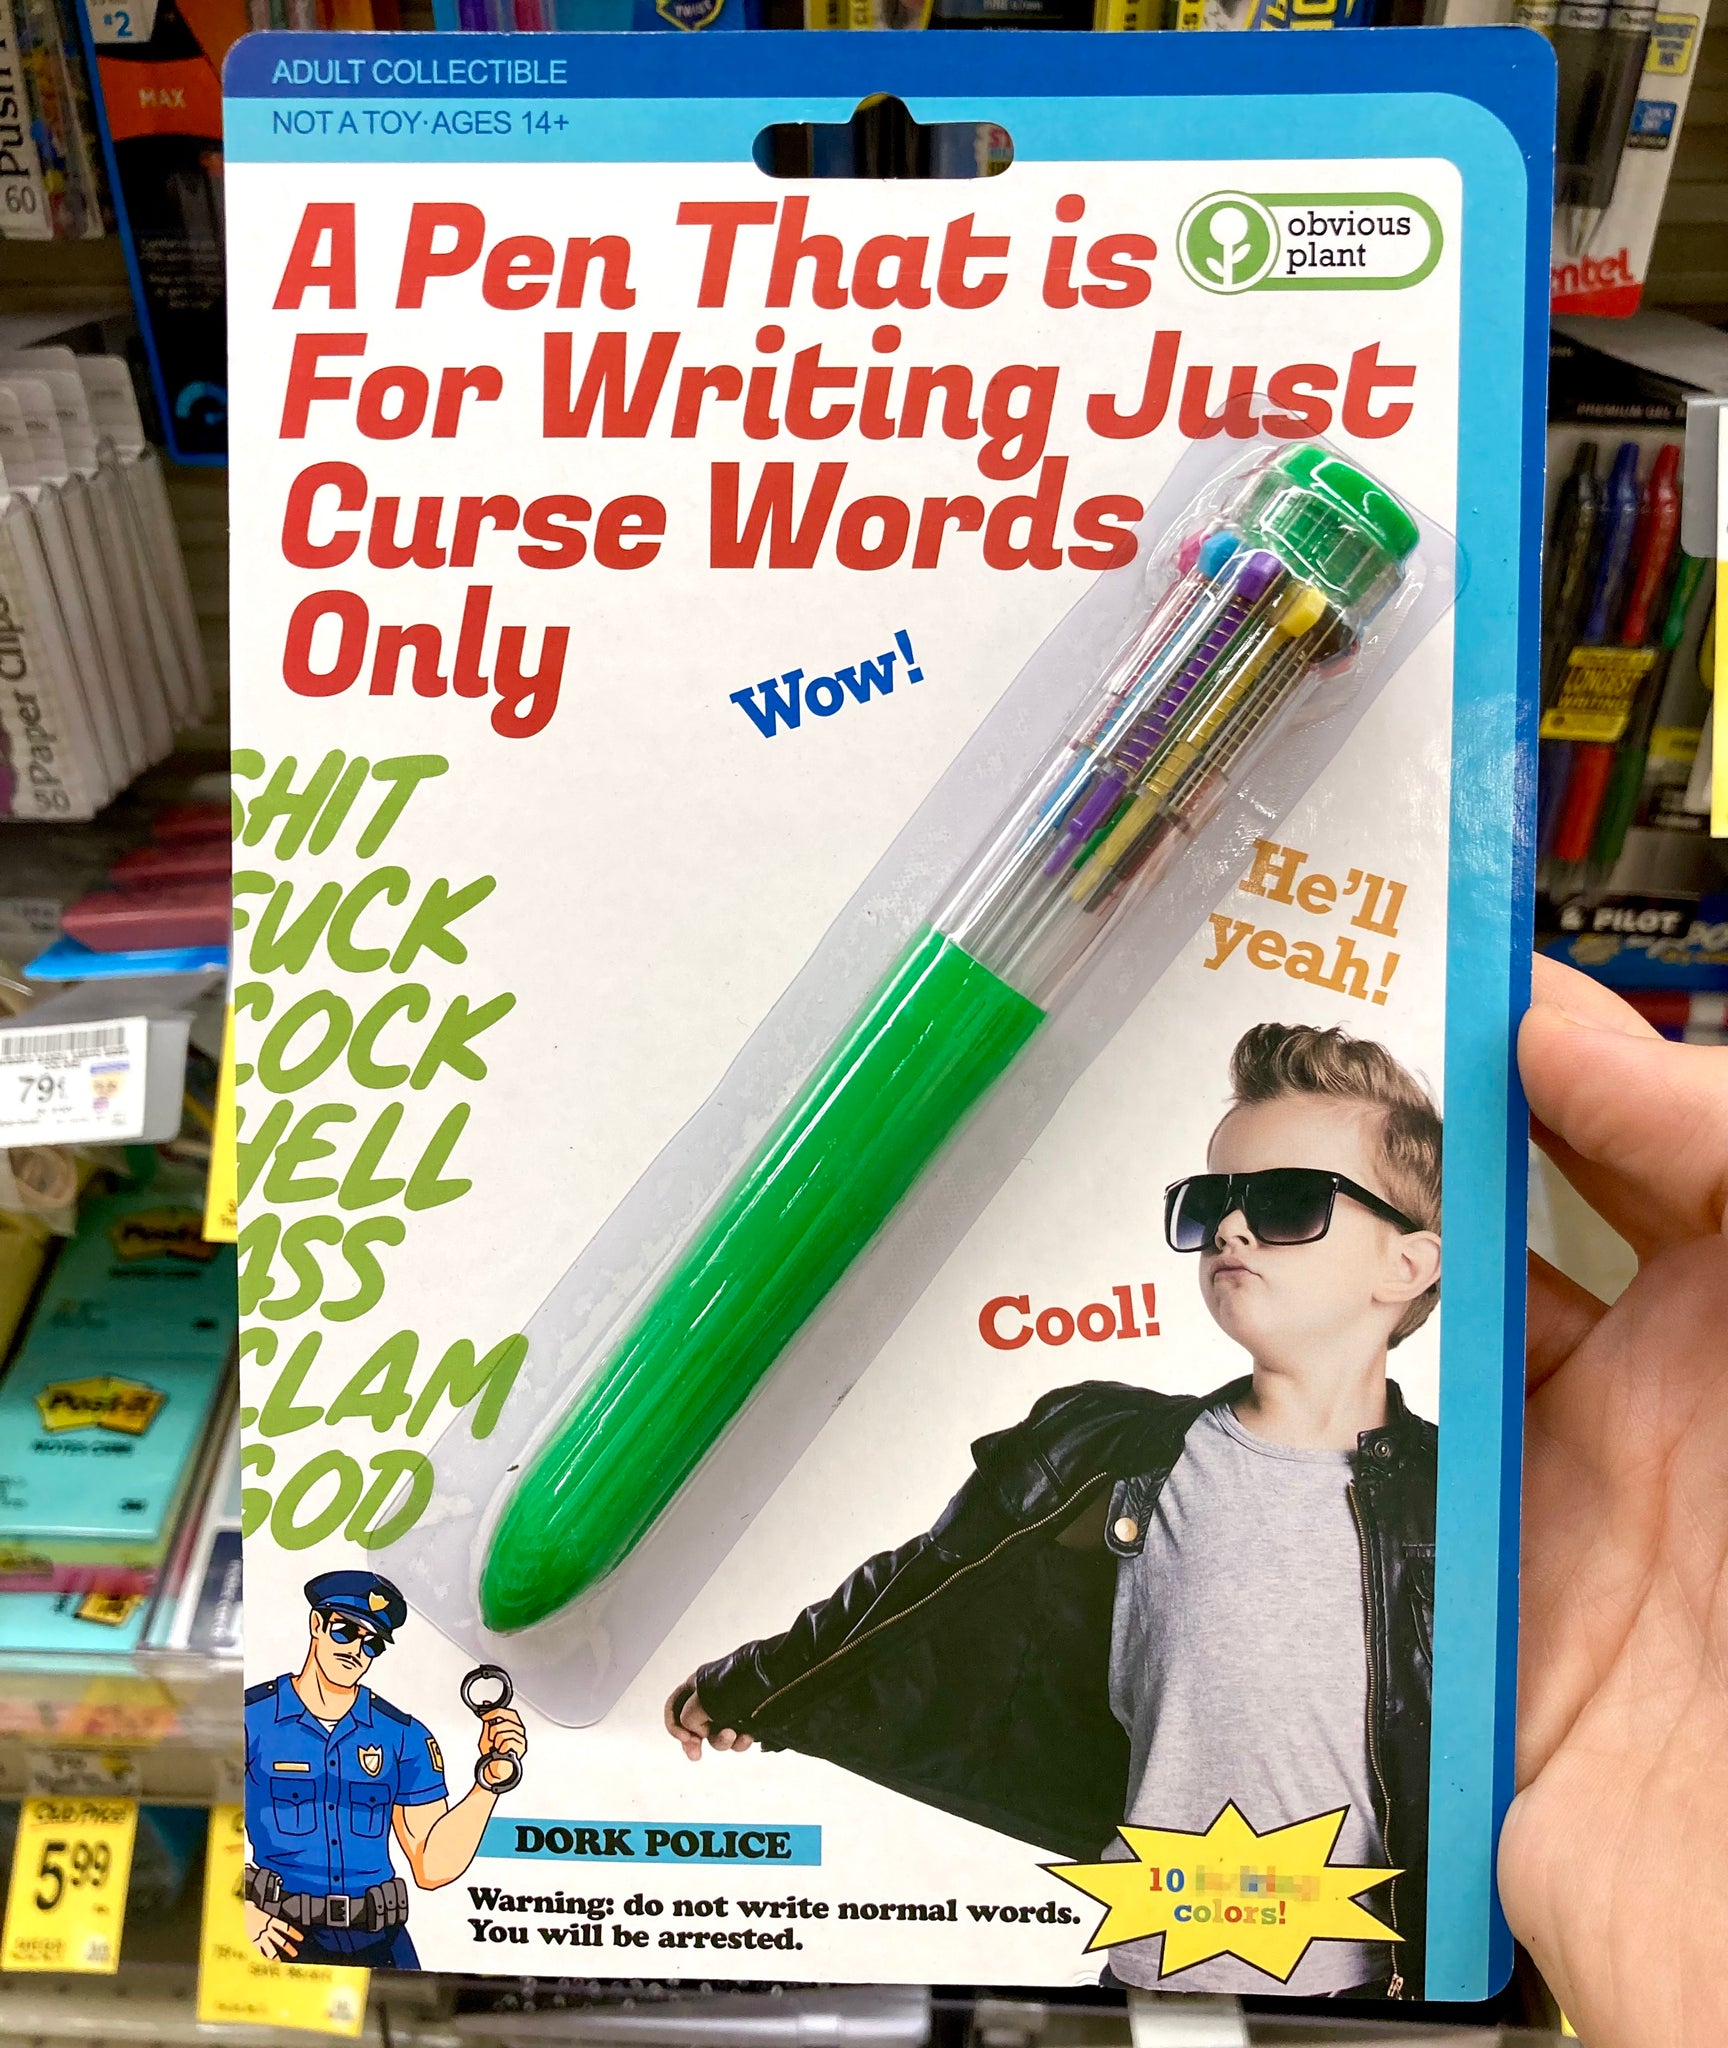 obvious plant on X: A Pen That is For Writing Just Curse Words